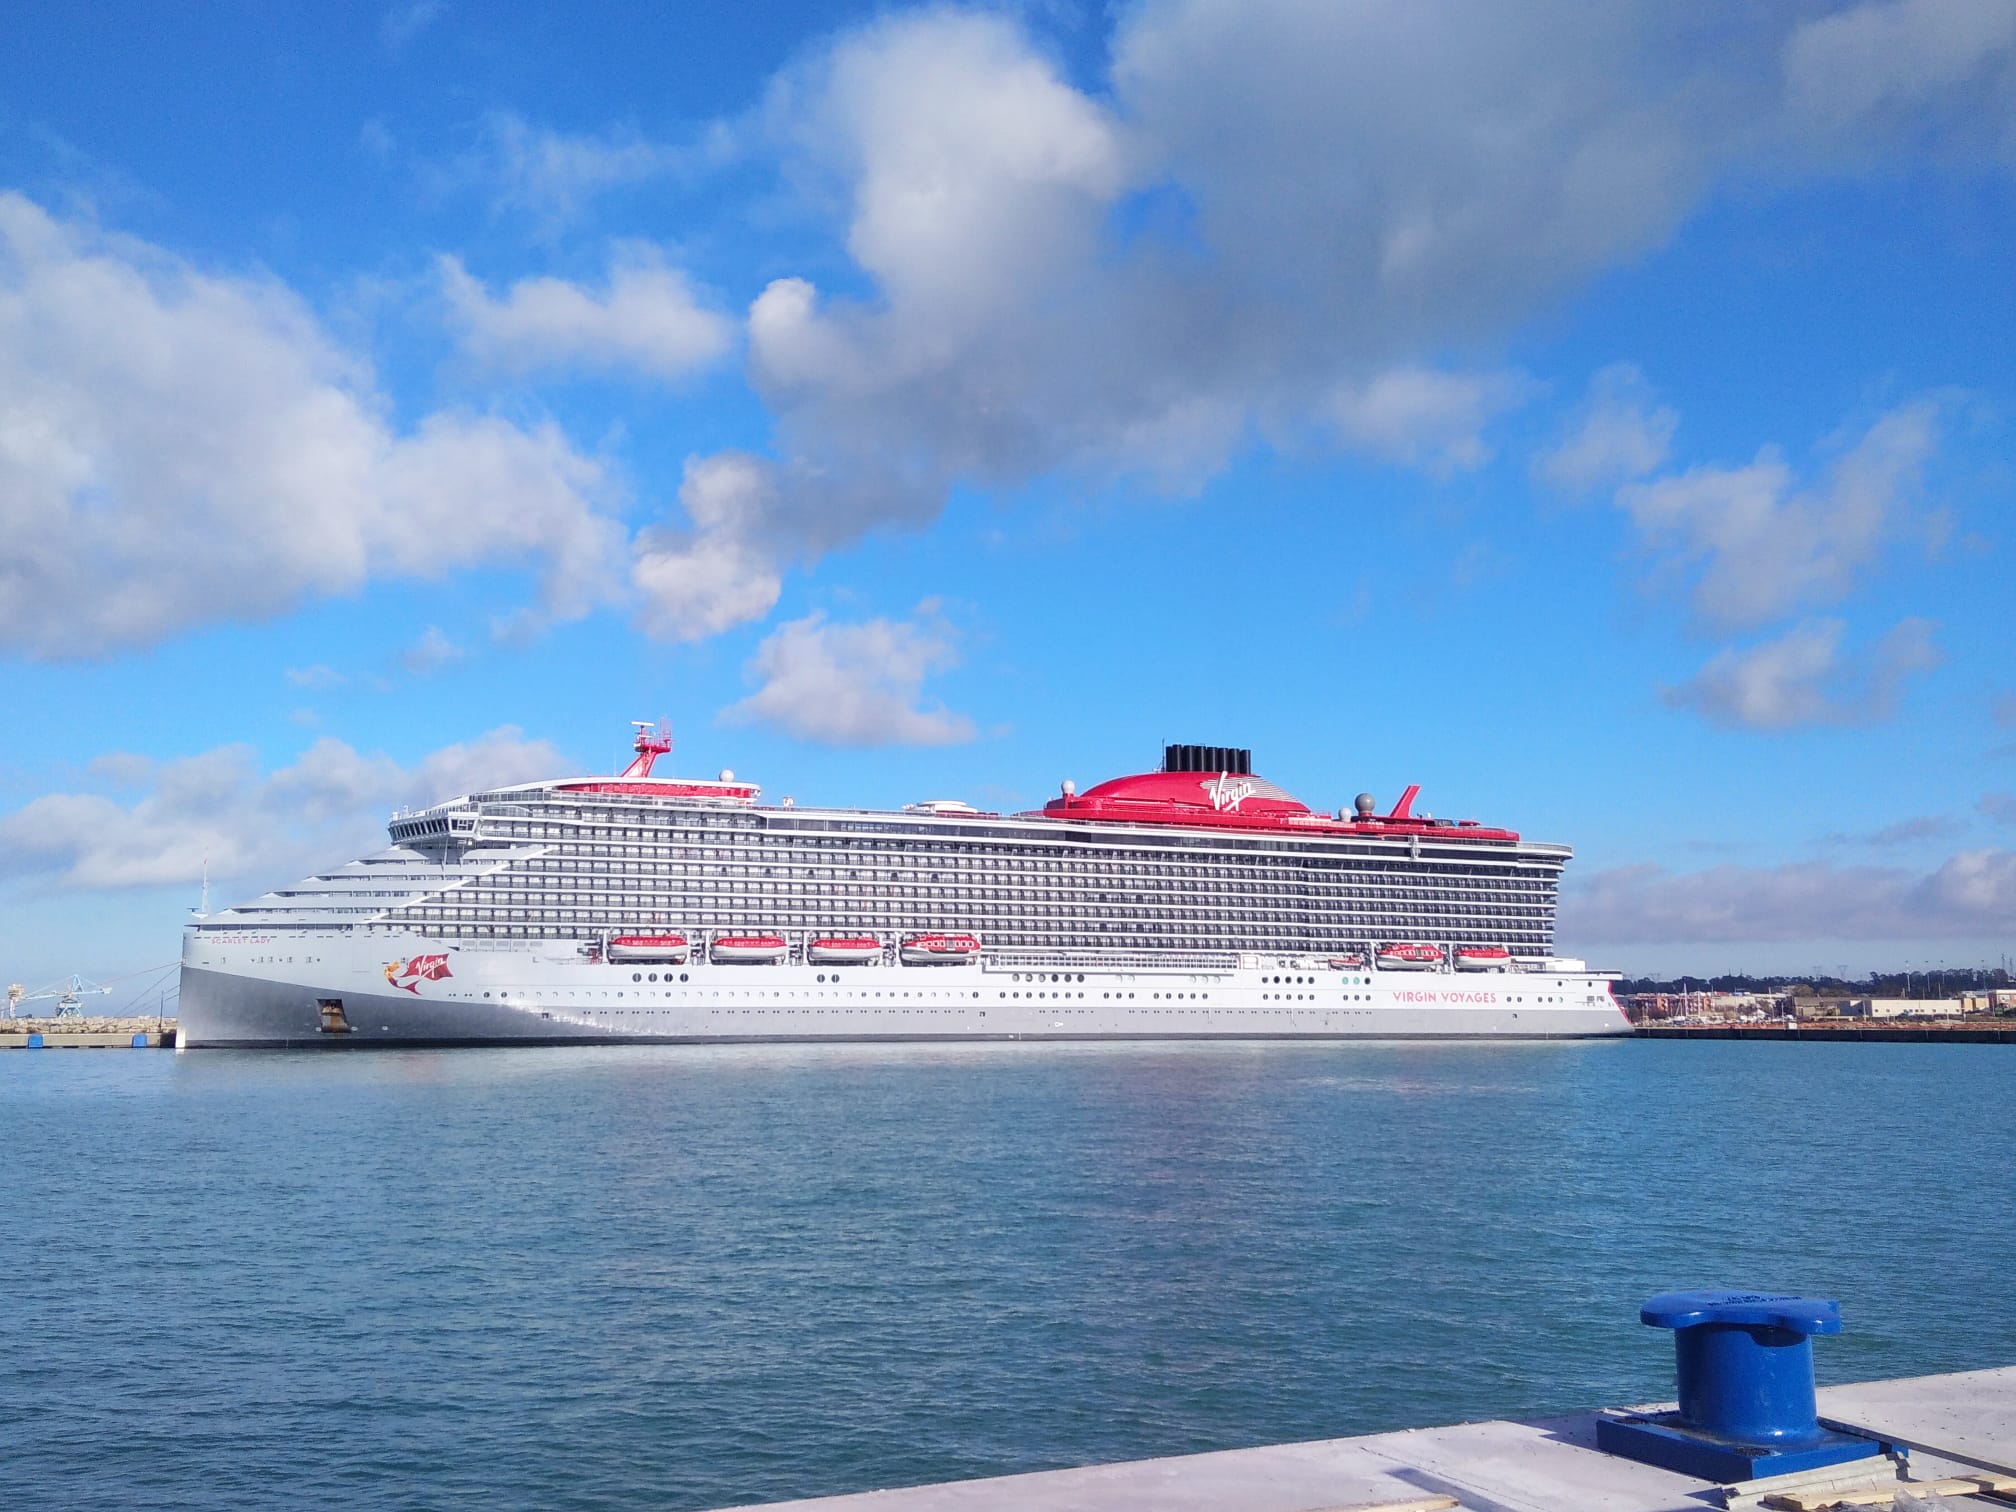 Beautiful Scarlet Lady moored at the port of Civitavecchia. Photo by Andrea Chiricozzi